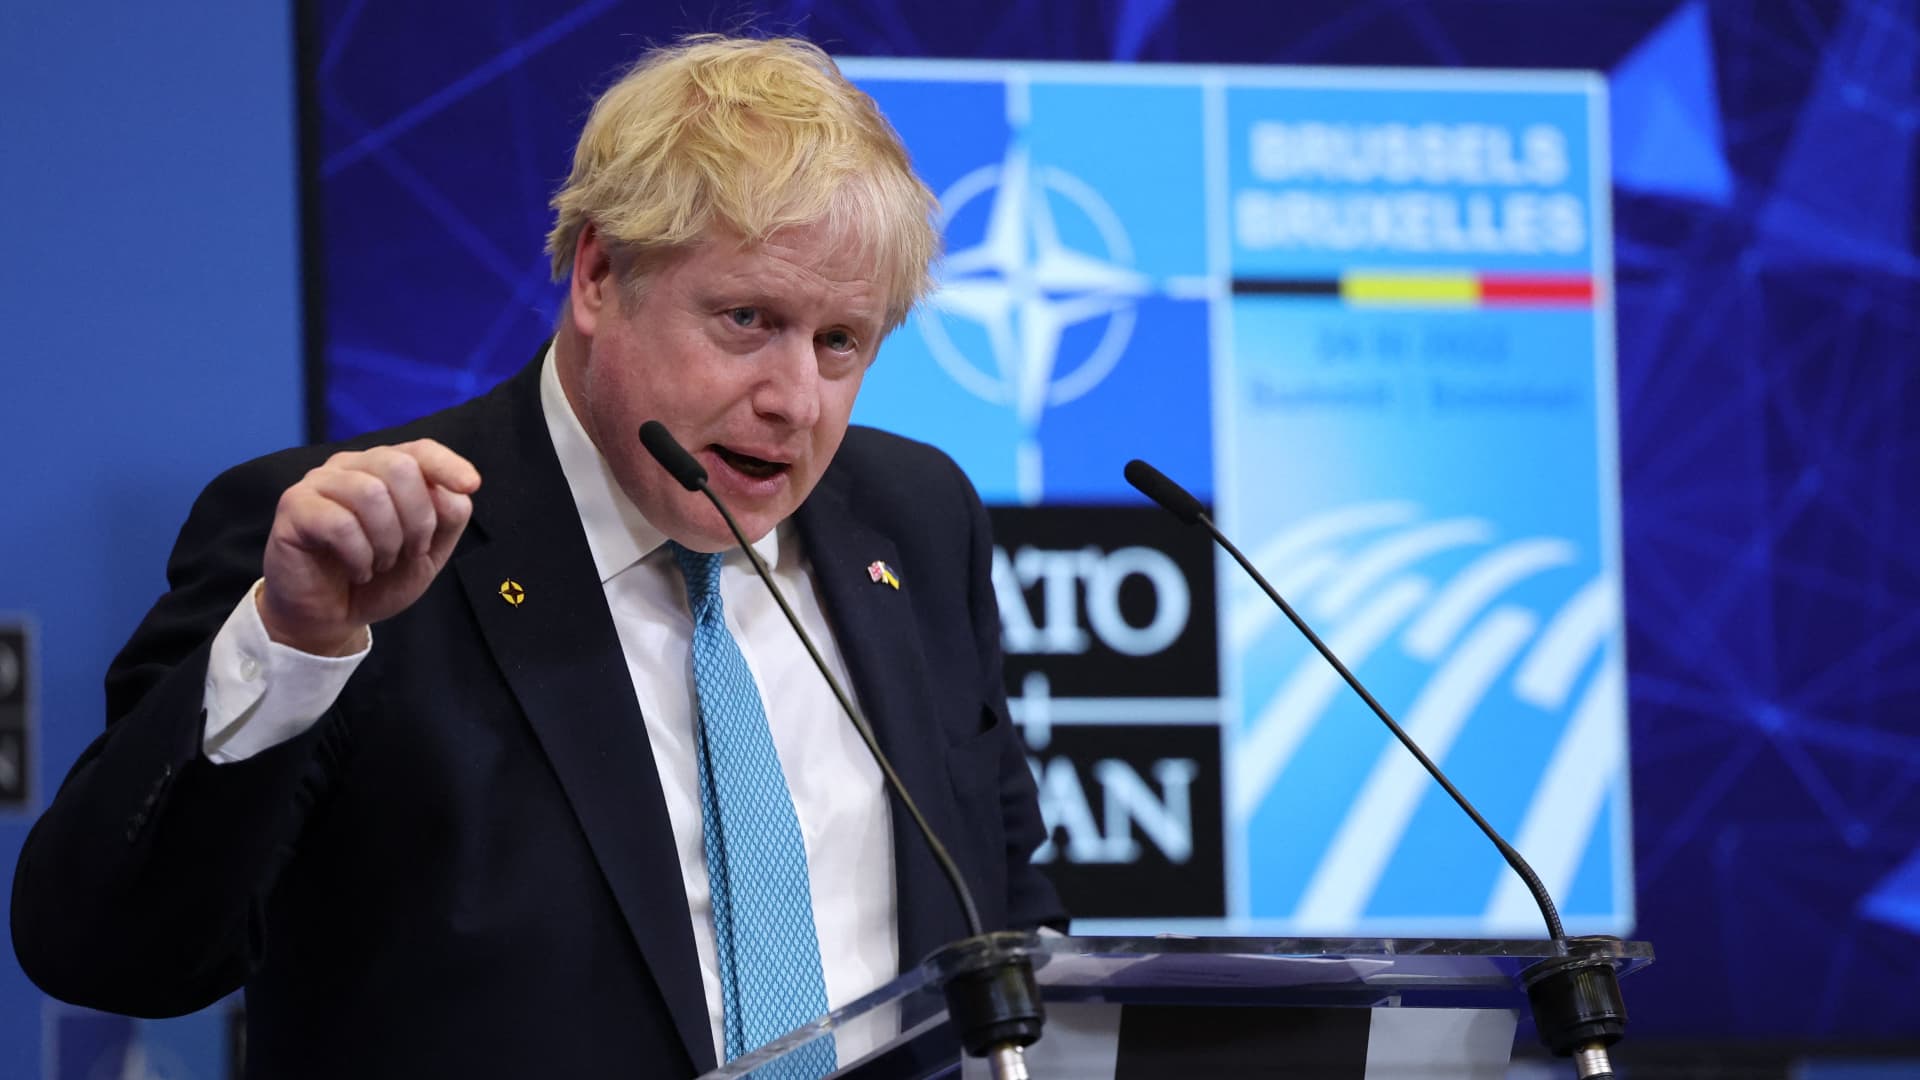 Britain's Prime Minister Boris Johnson speaks during a press conference at NATO Headquarters in Brussels on March 24, 2022.